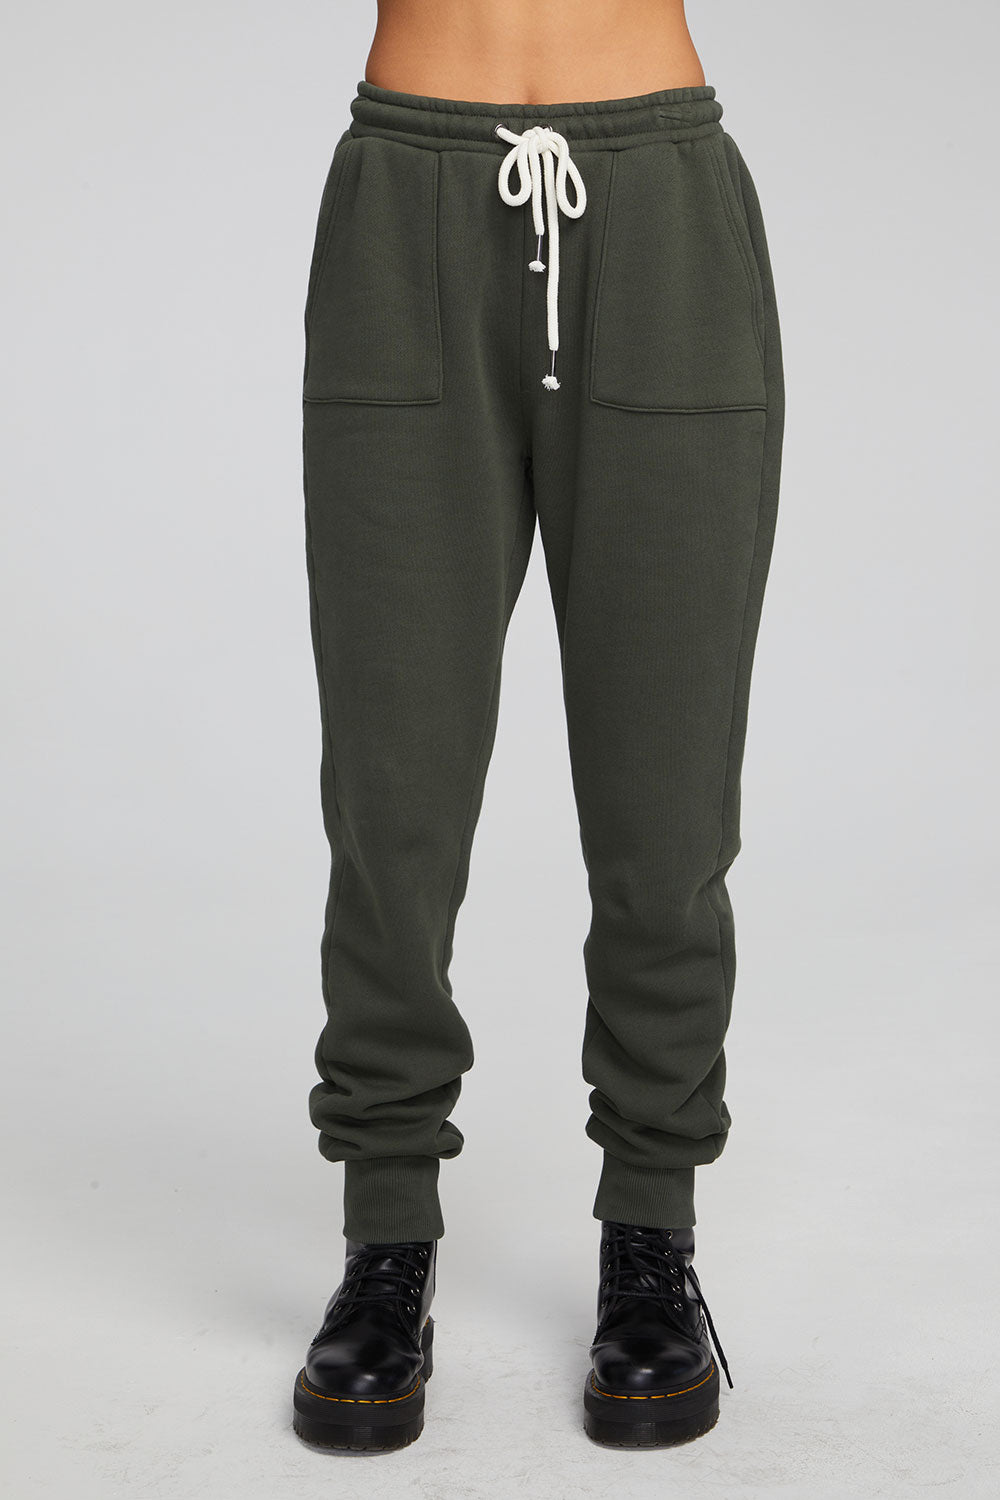 Tessa Forest Night Jogger WOMENS chaserbrand